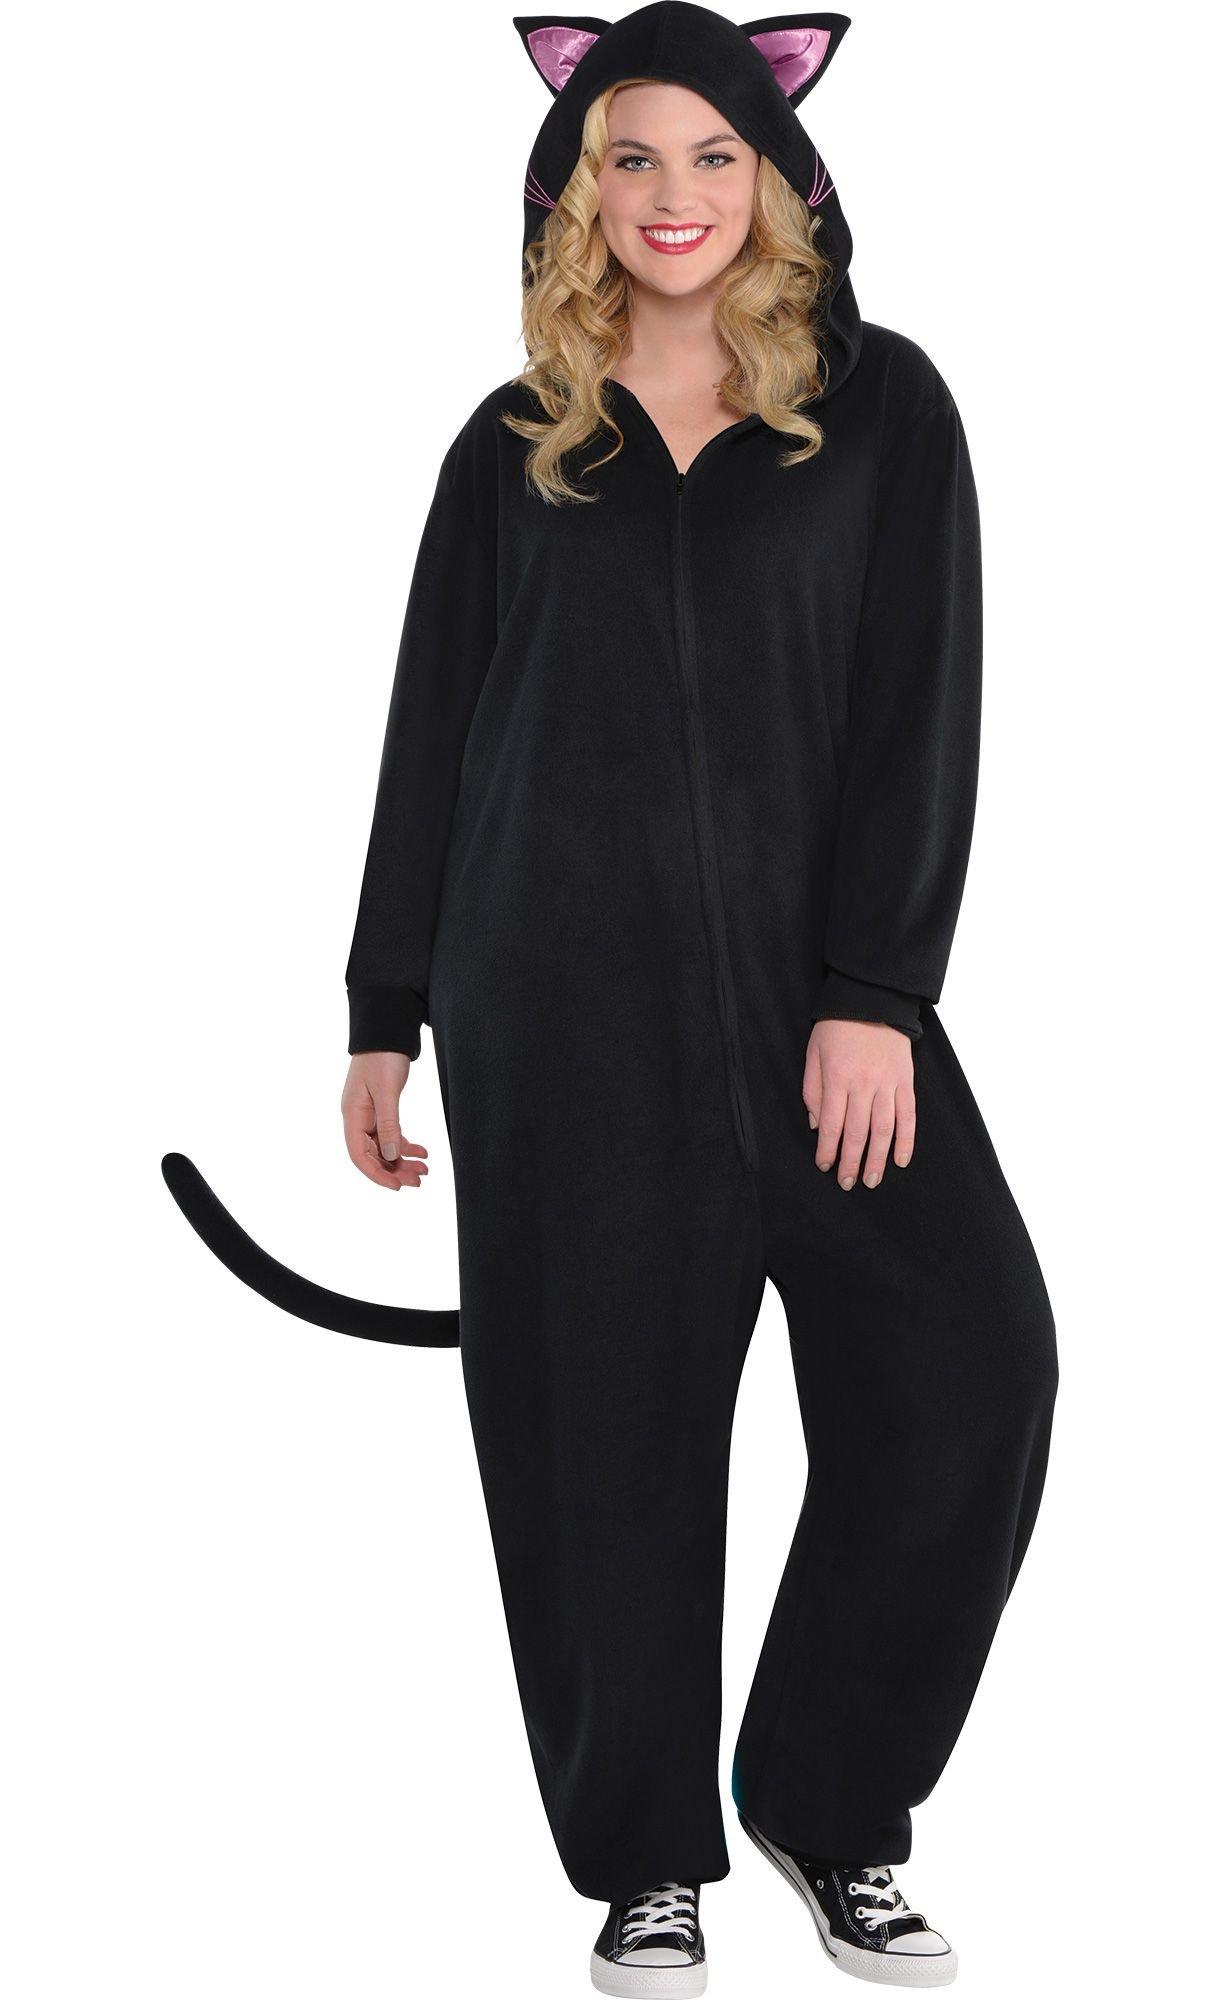 Adult Zipster Black Cat One Piece Costume Plus Size